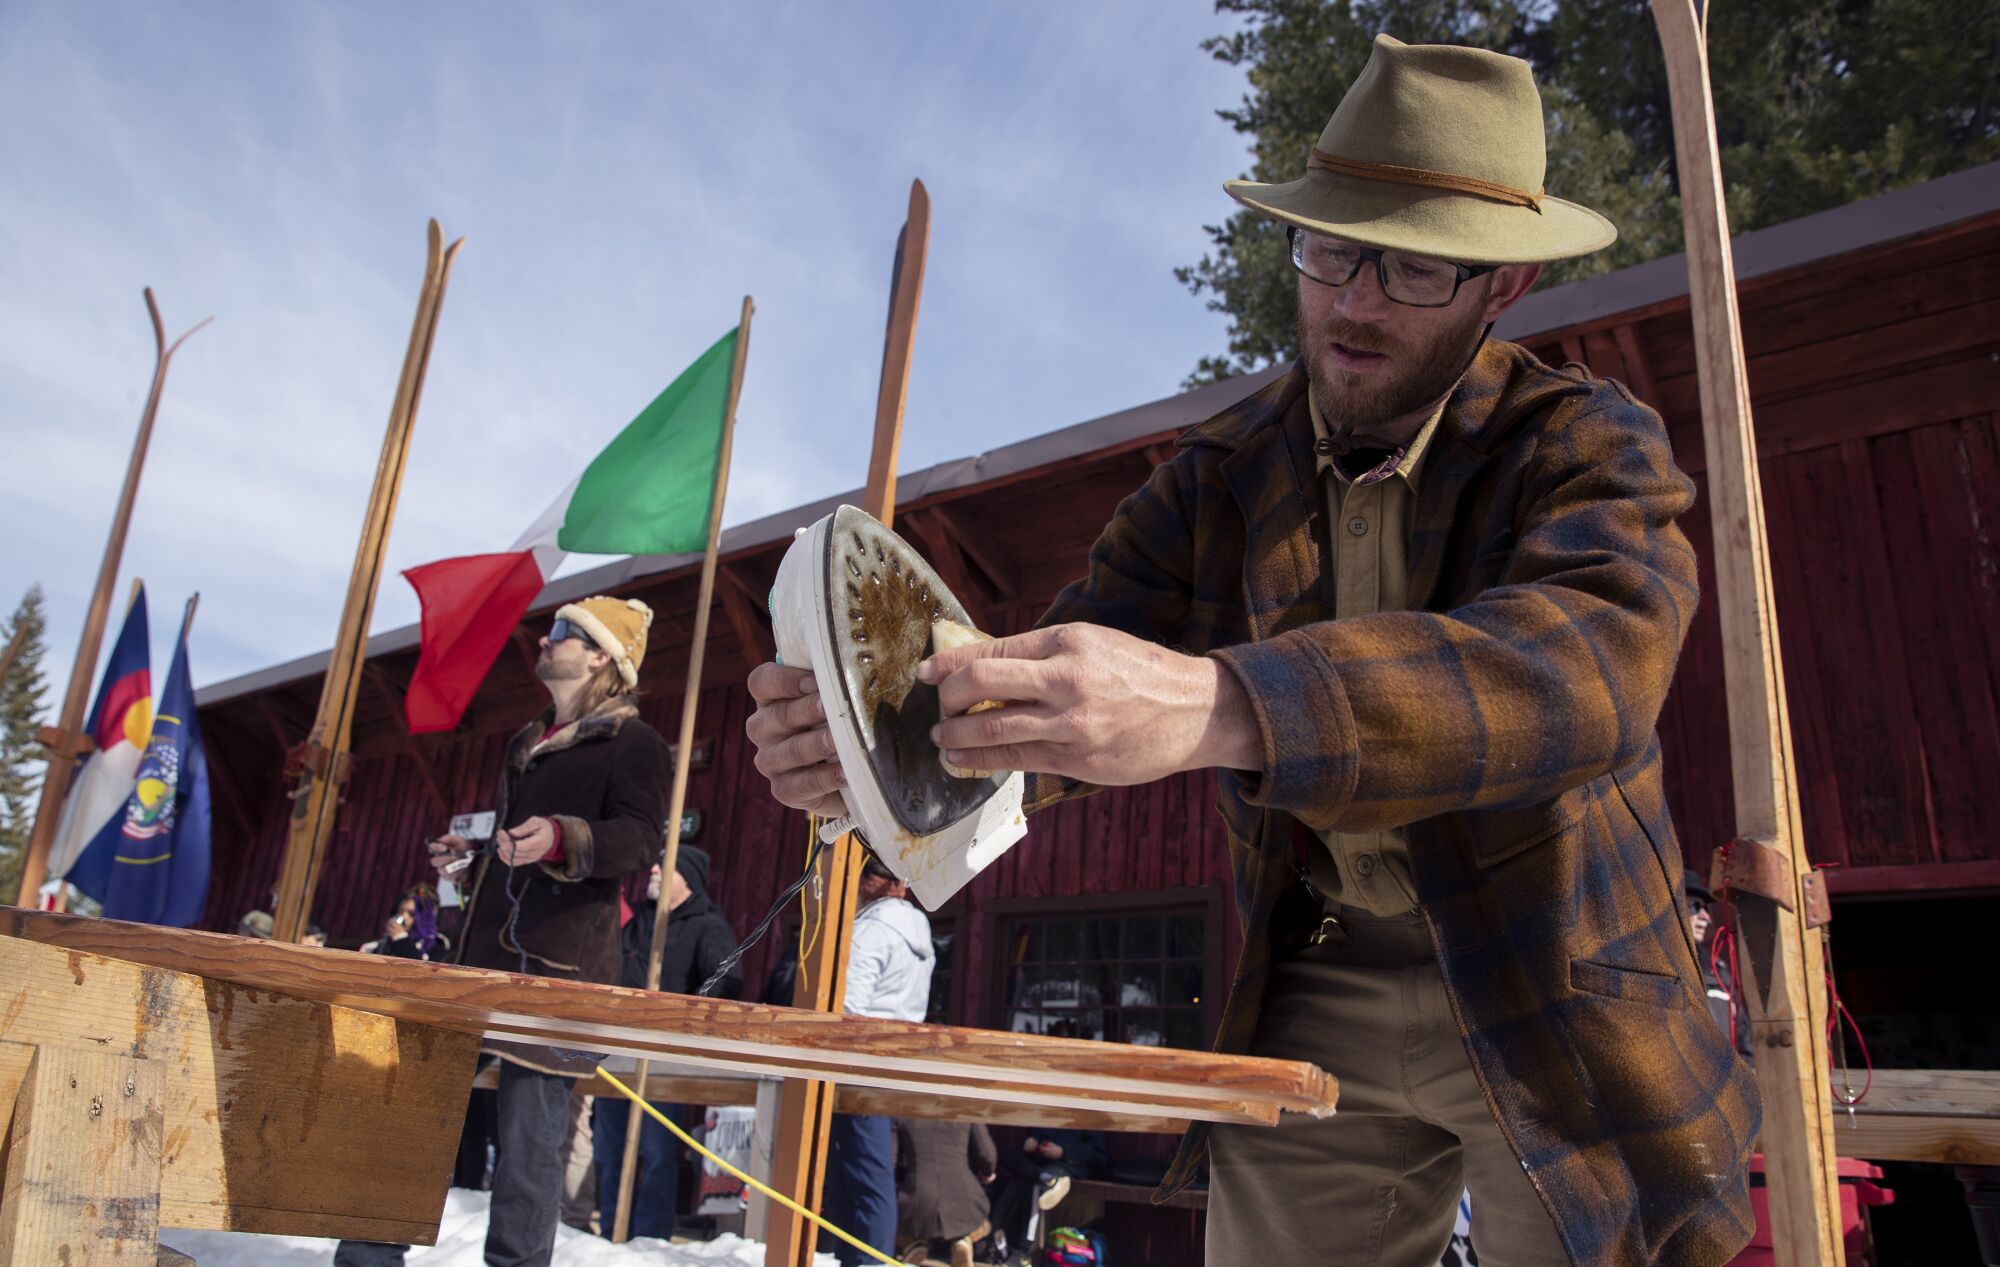 A man uses an iron to melt wax onto his skis